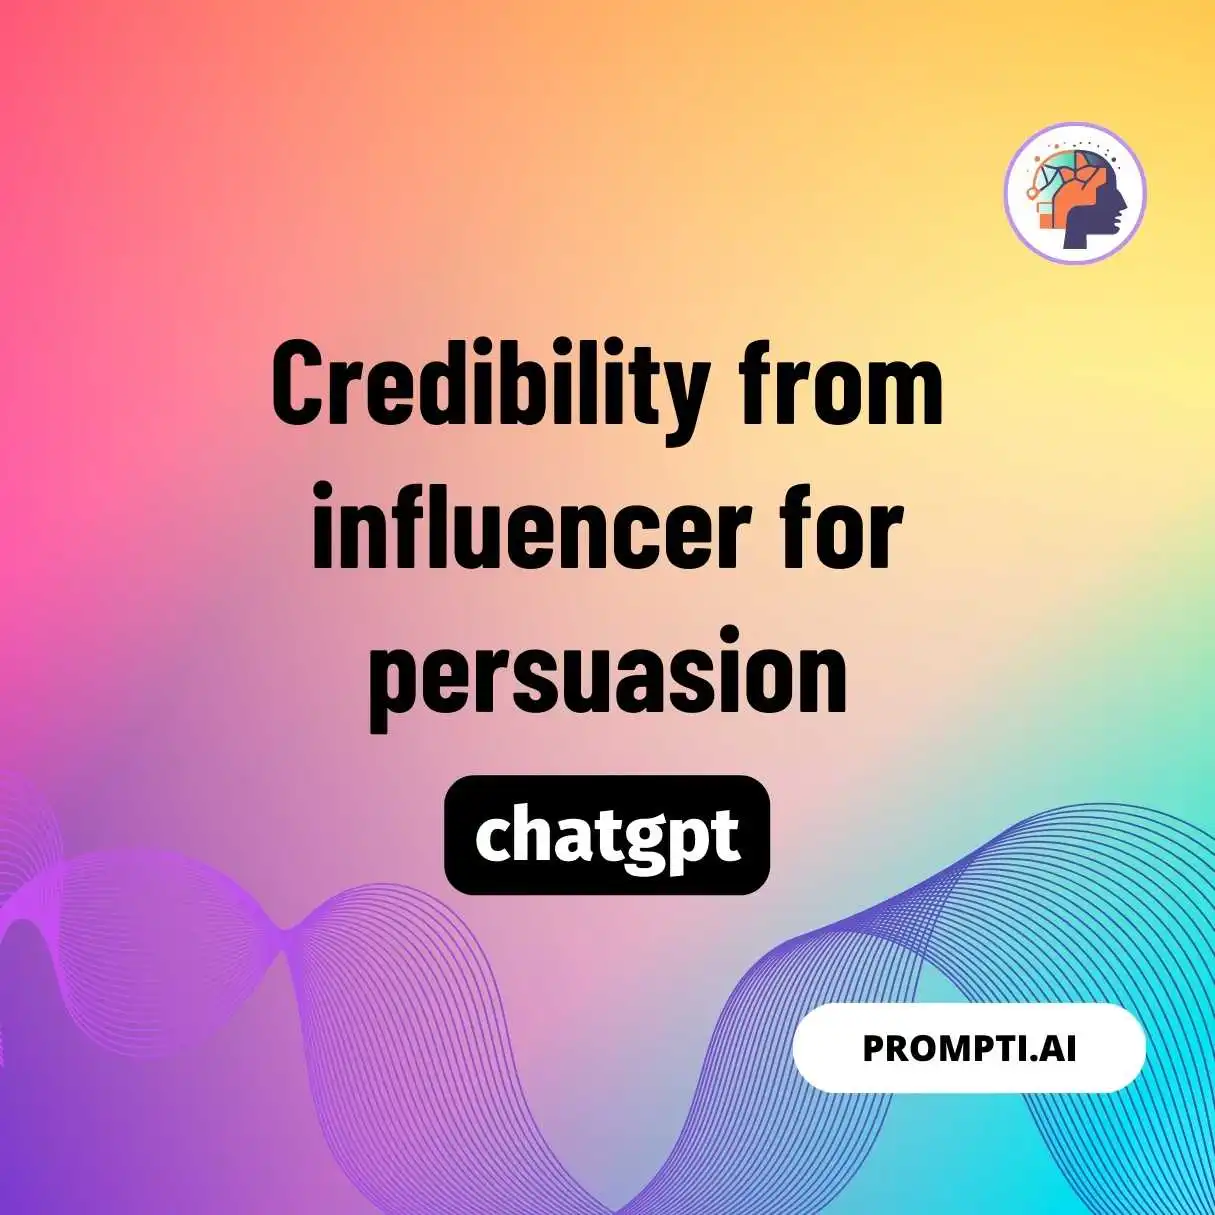 Credibility from influencer for persuasion